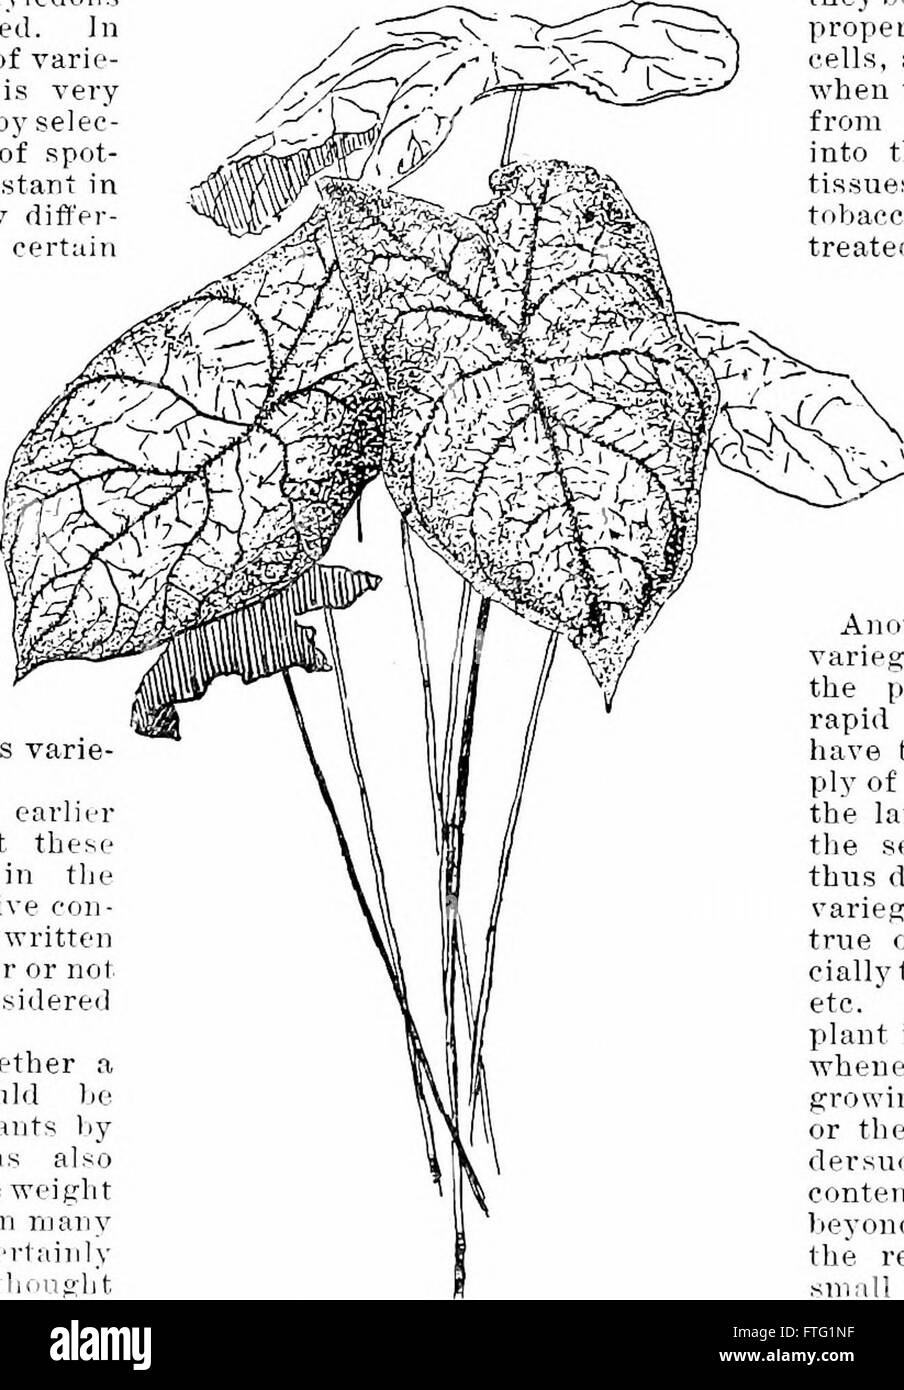 Cyclopedia of American horticulture, comprising suggestions for cultivation of horticultural plants, descriptions of the species of fruits, vegetables, flowers, and ornamental plants sold in the Stock Photo